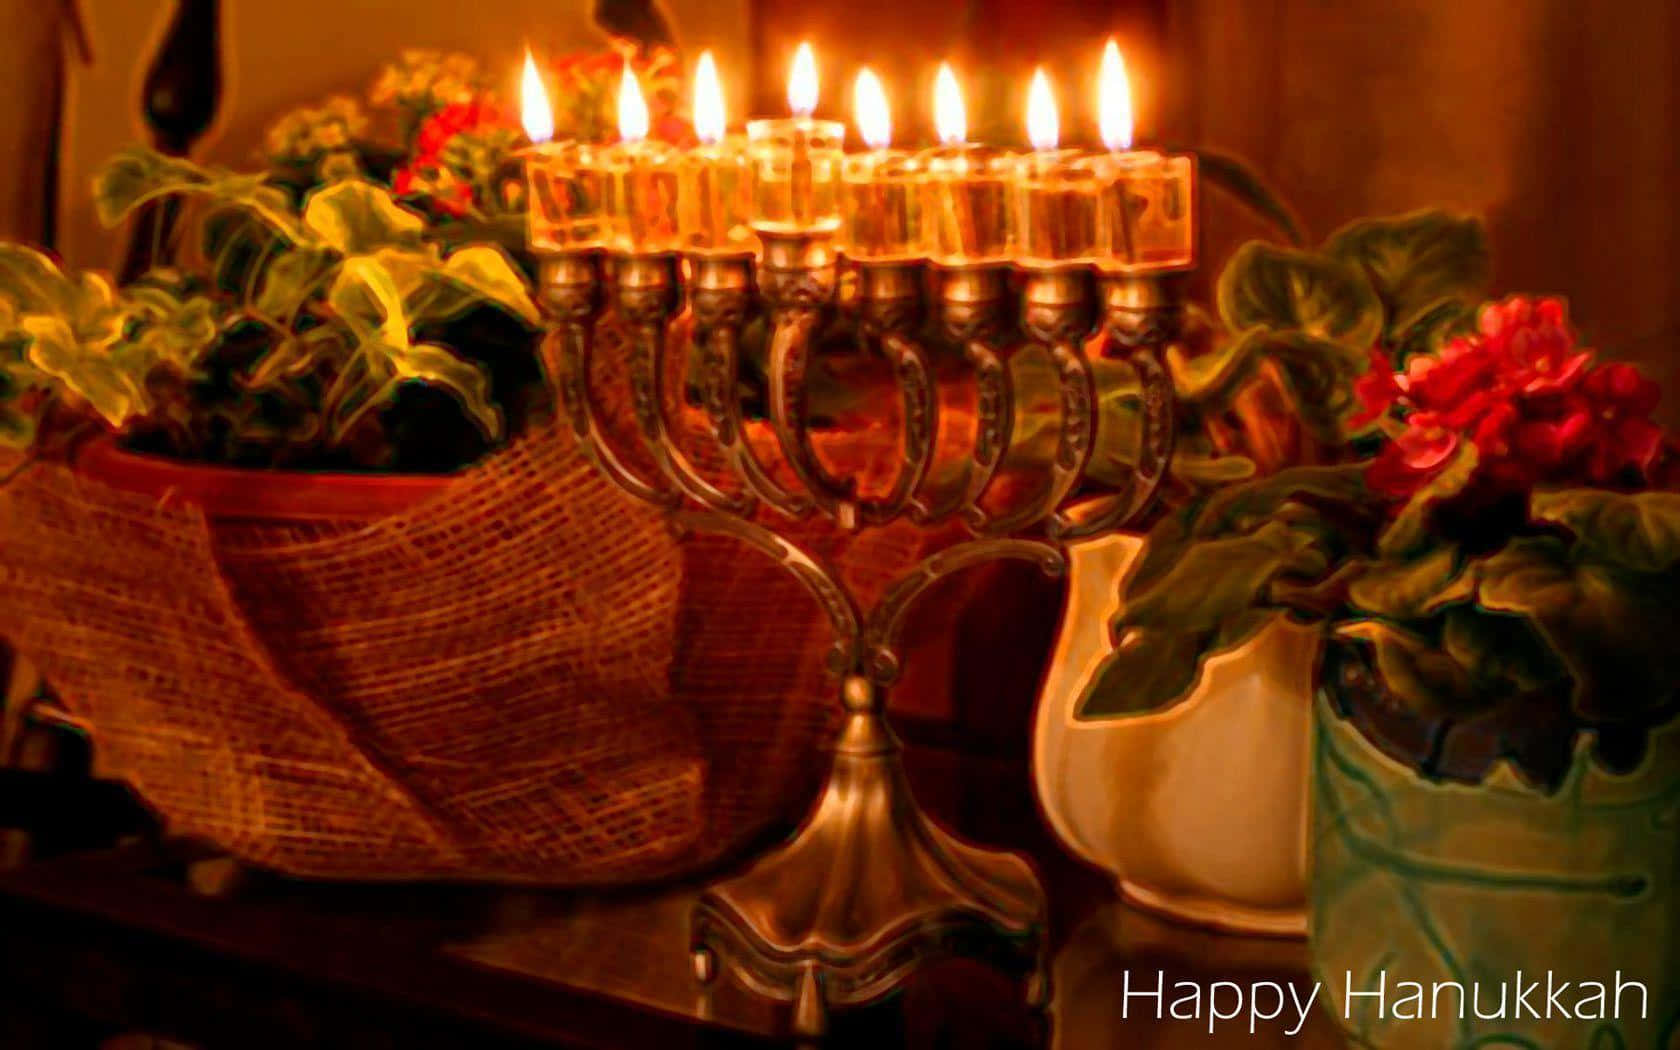 Celebrate Hanukkah with Love and Light!